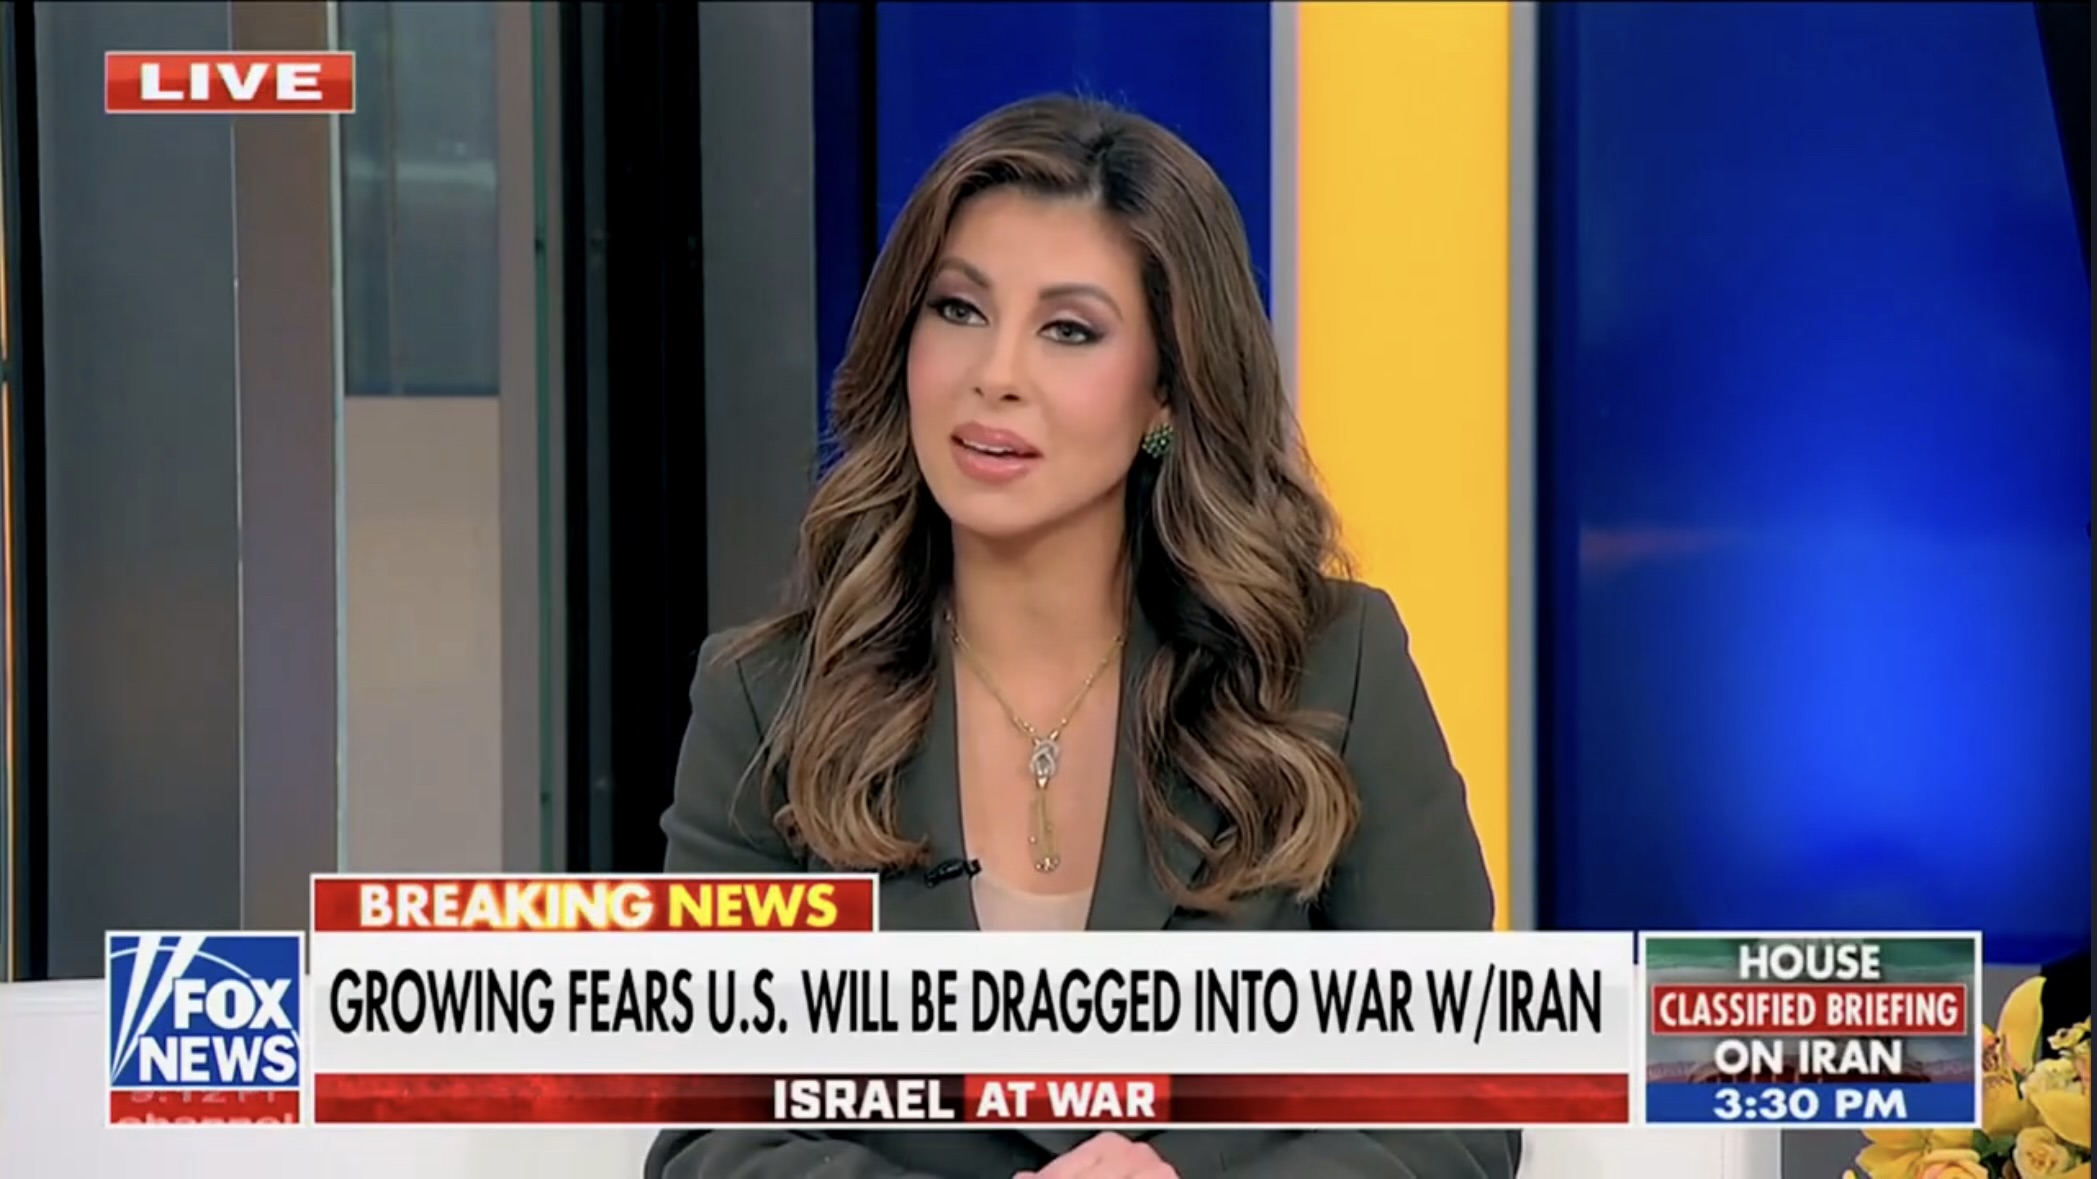 Morgan Ortagus Joins Outnumbered